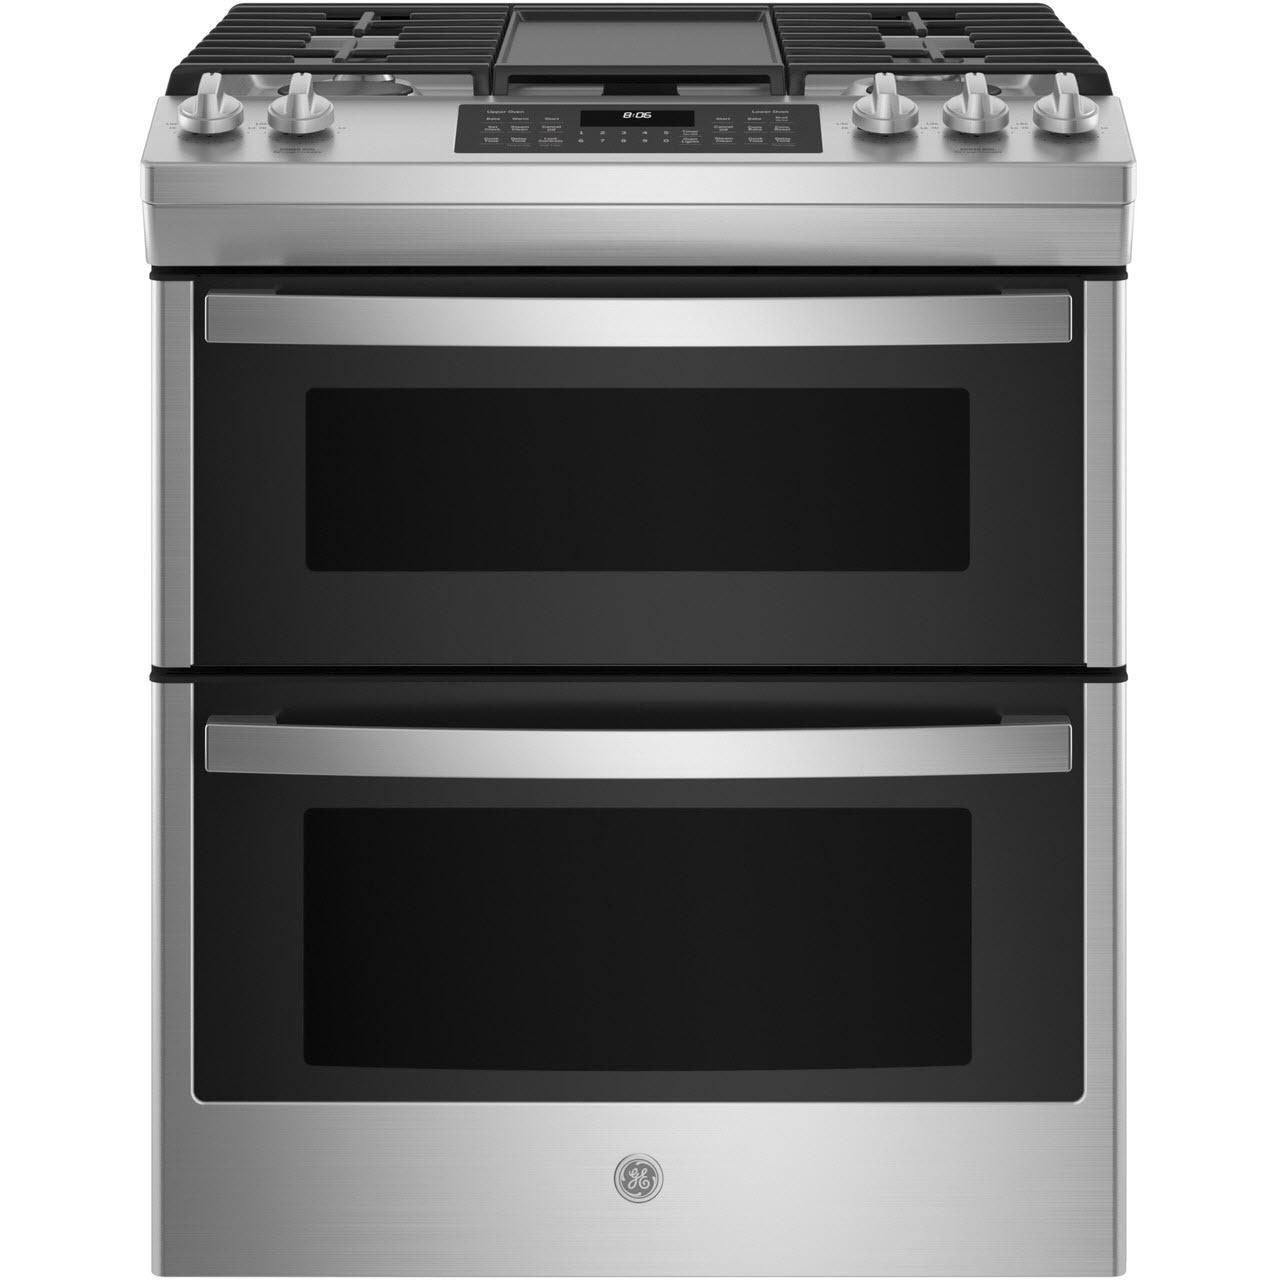 GE 30-inch Slide-in Gas Range with True European Convection Technology JGSS86SPSS